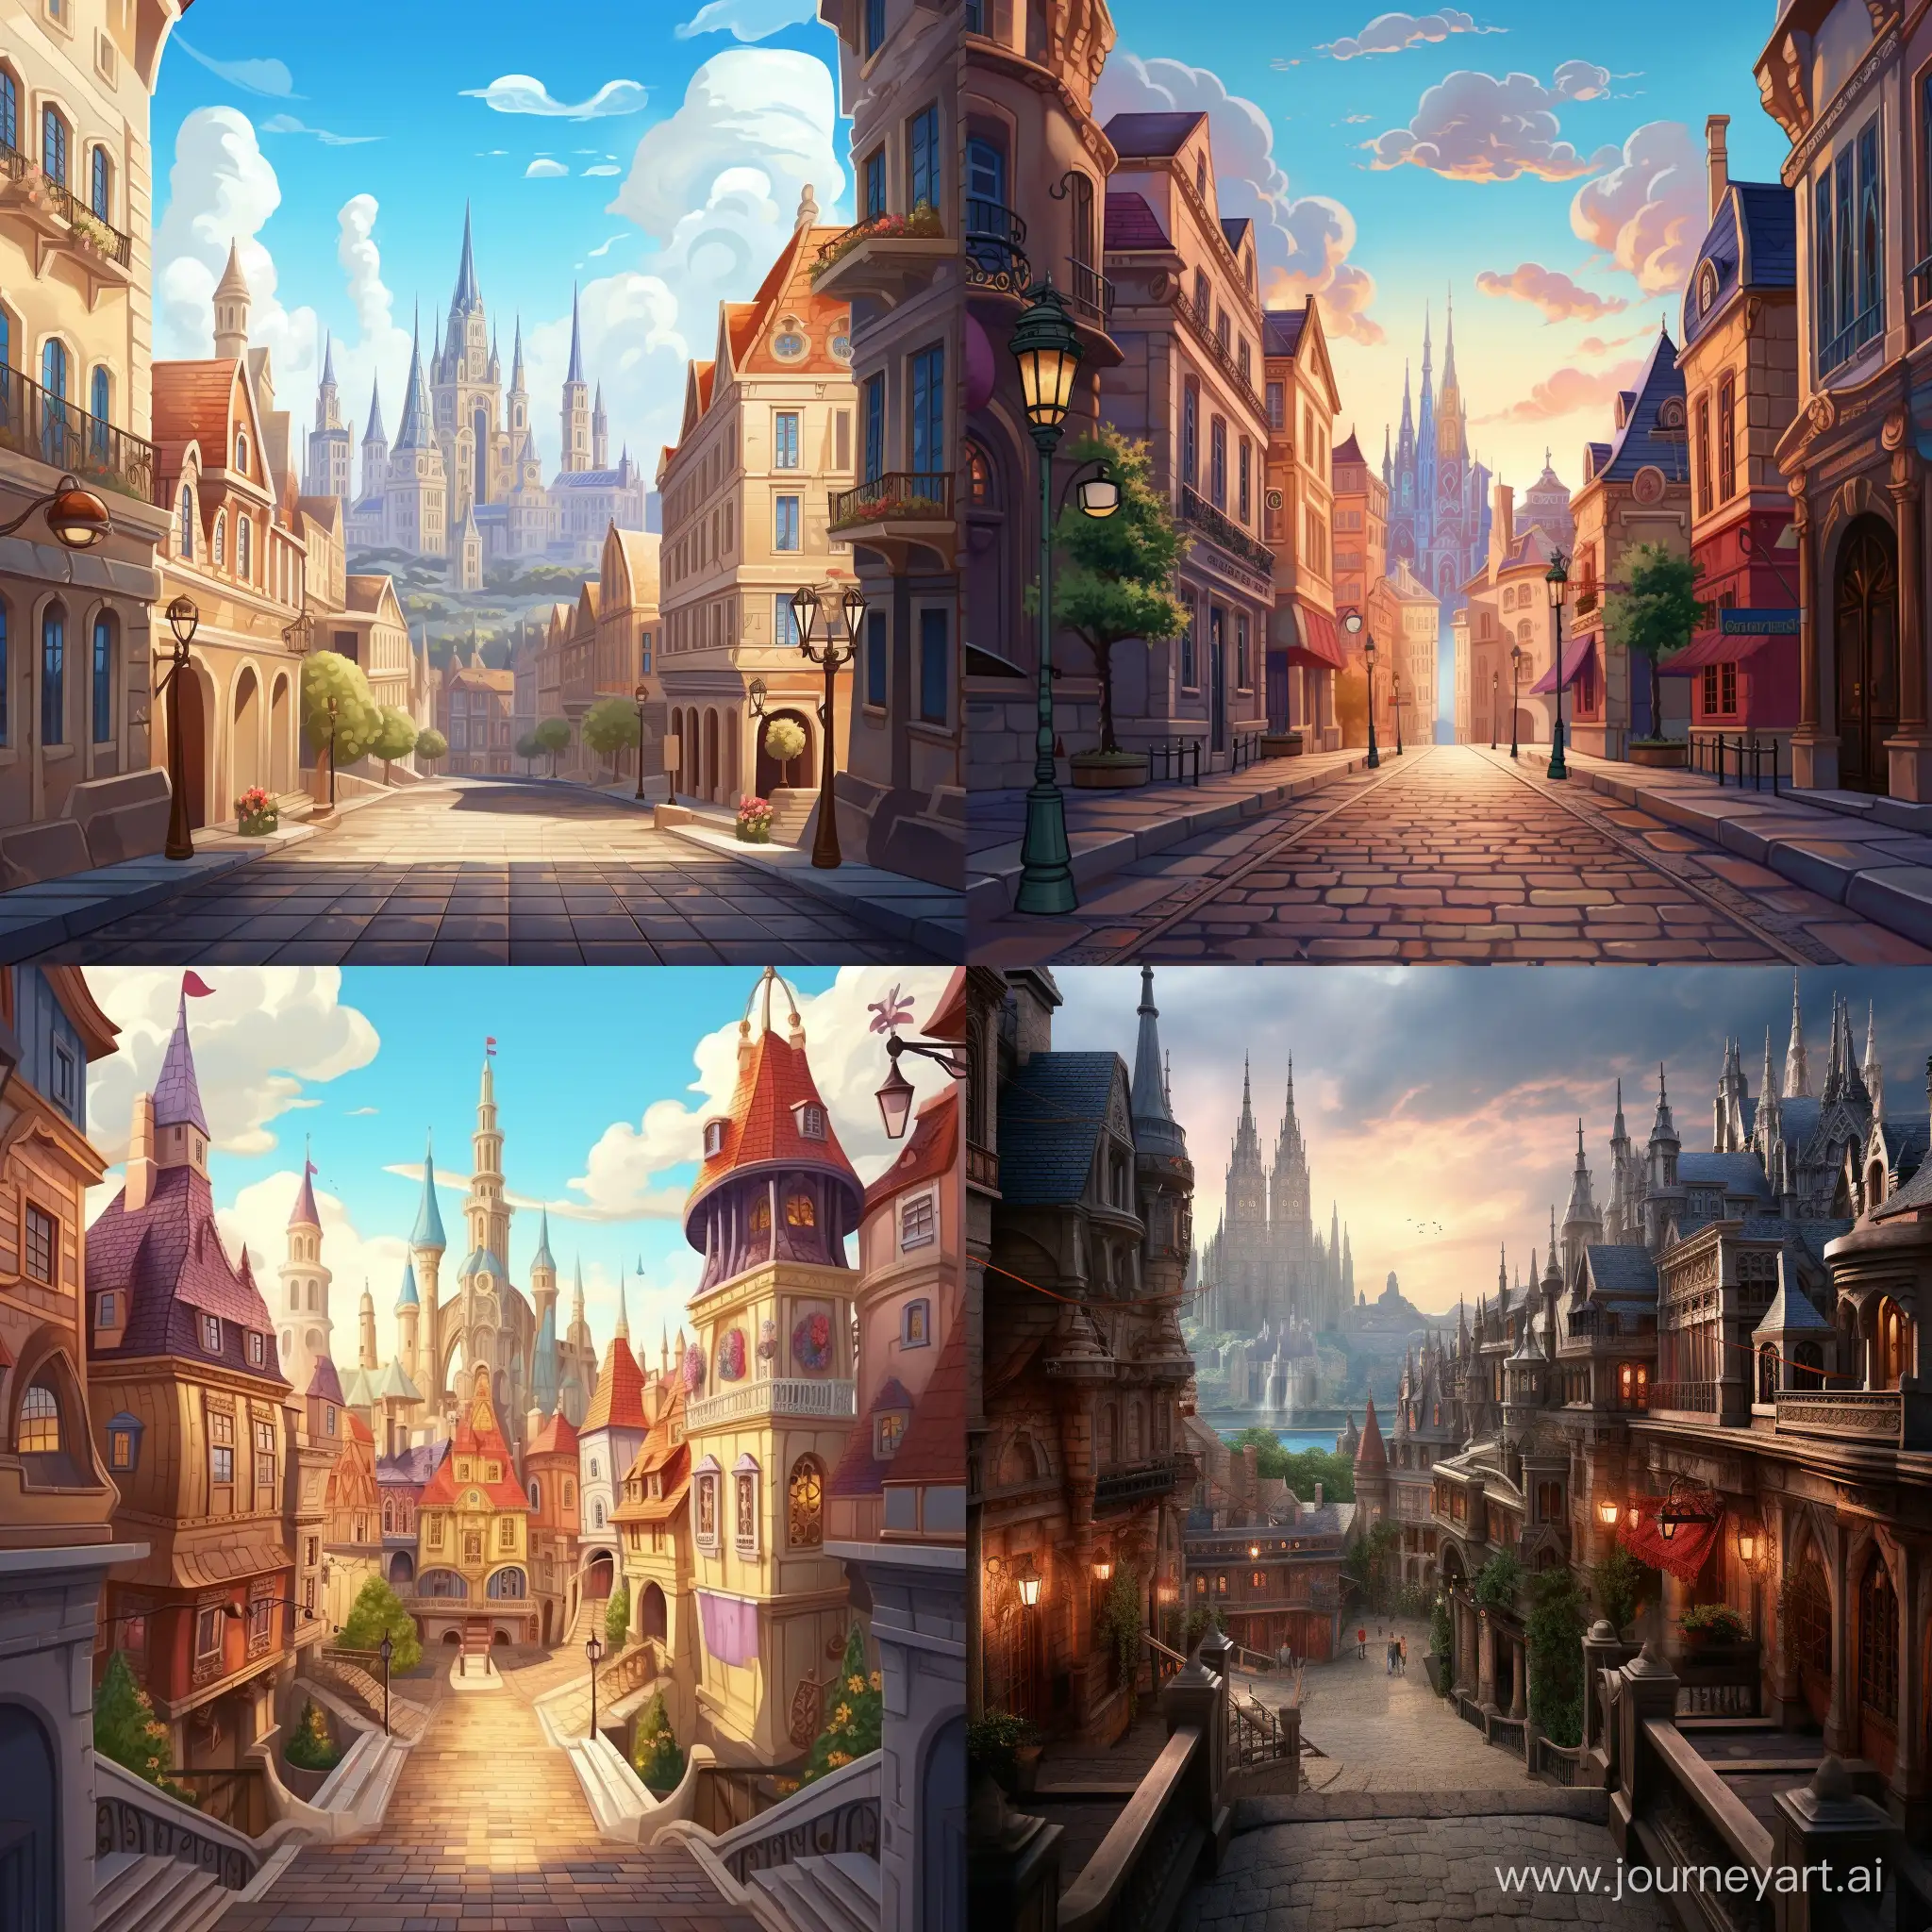 Enchanting-View-of-a-Fairy-Tale-European-City-from-Second-Floor